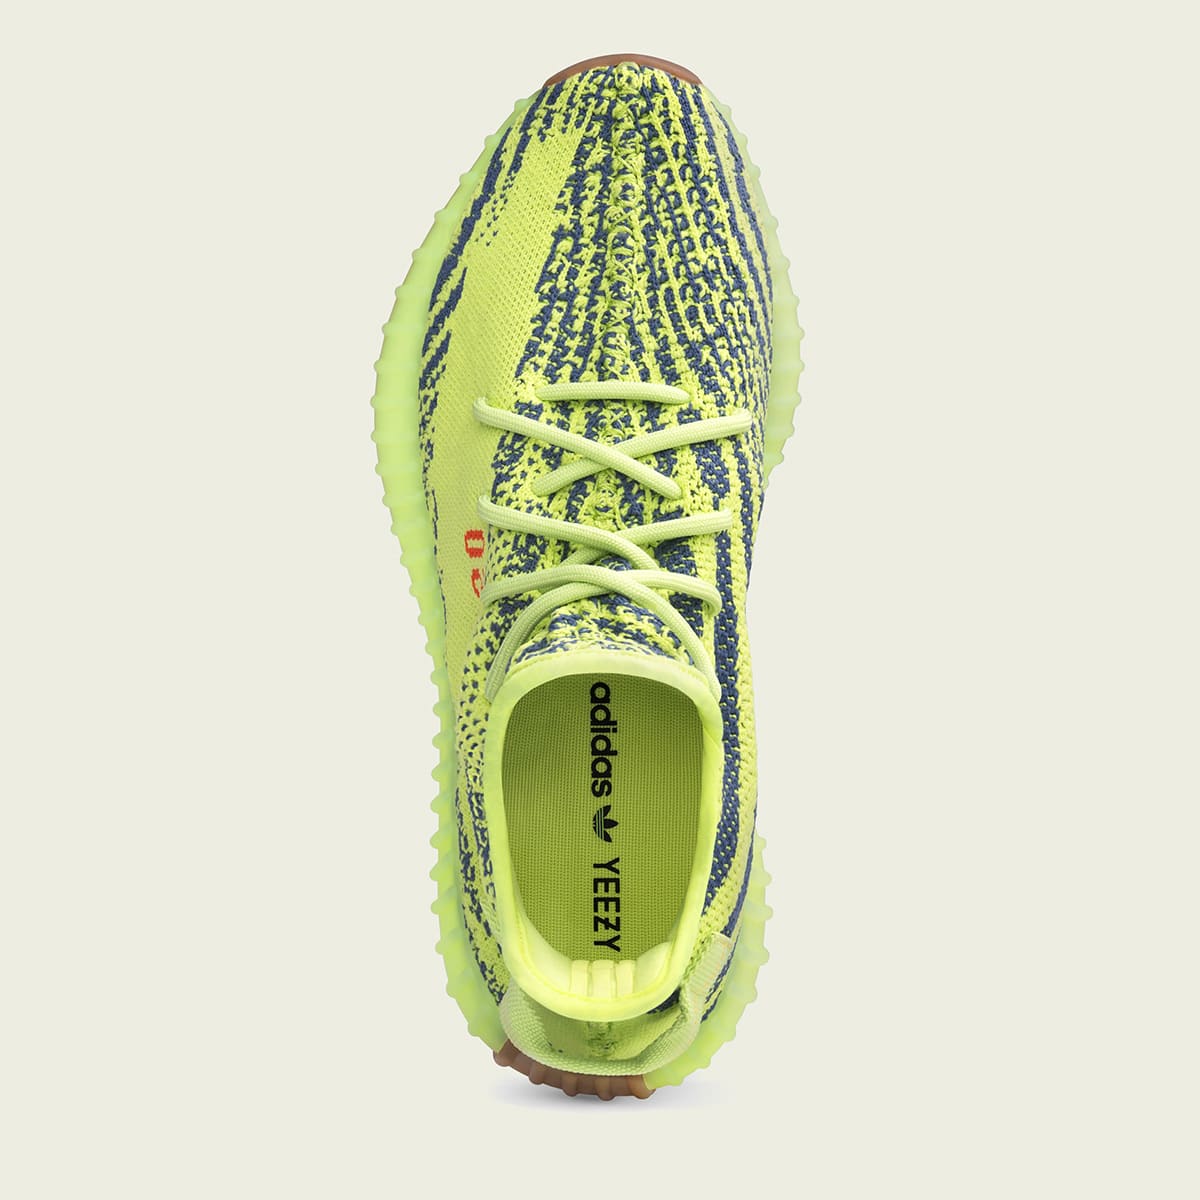 yeezy boost 350 v2 fluorescent yellow